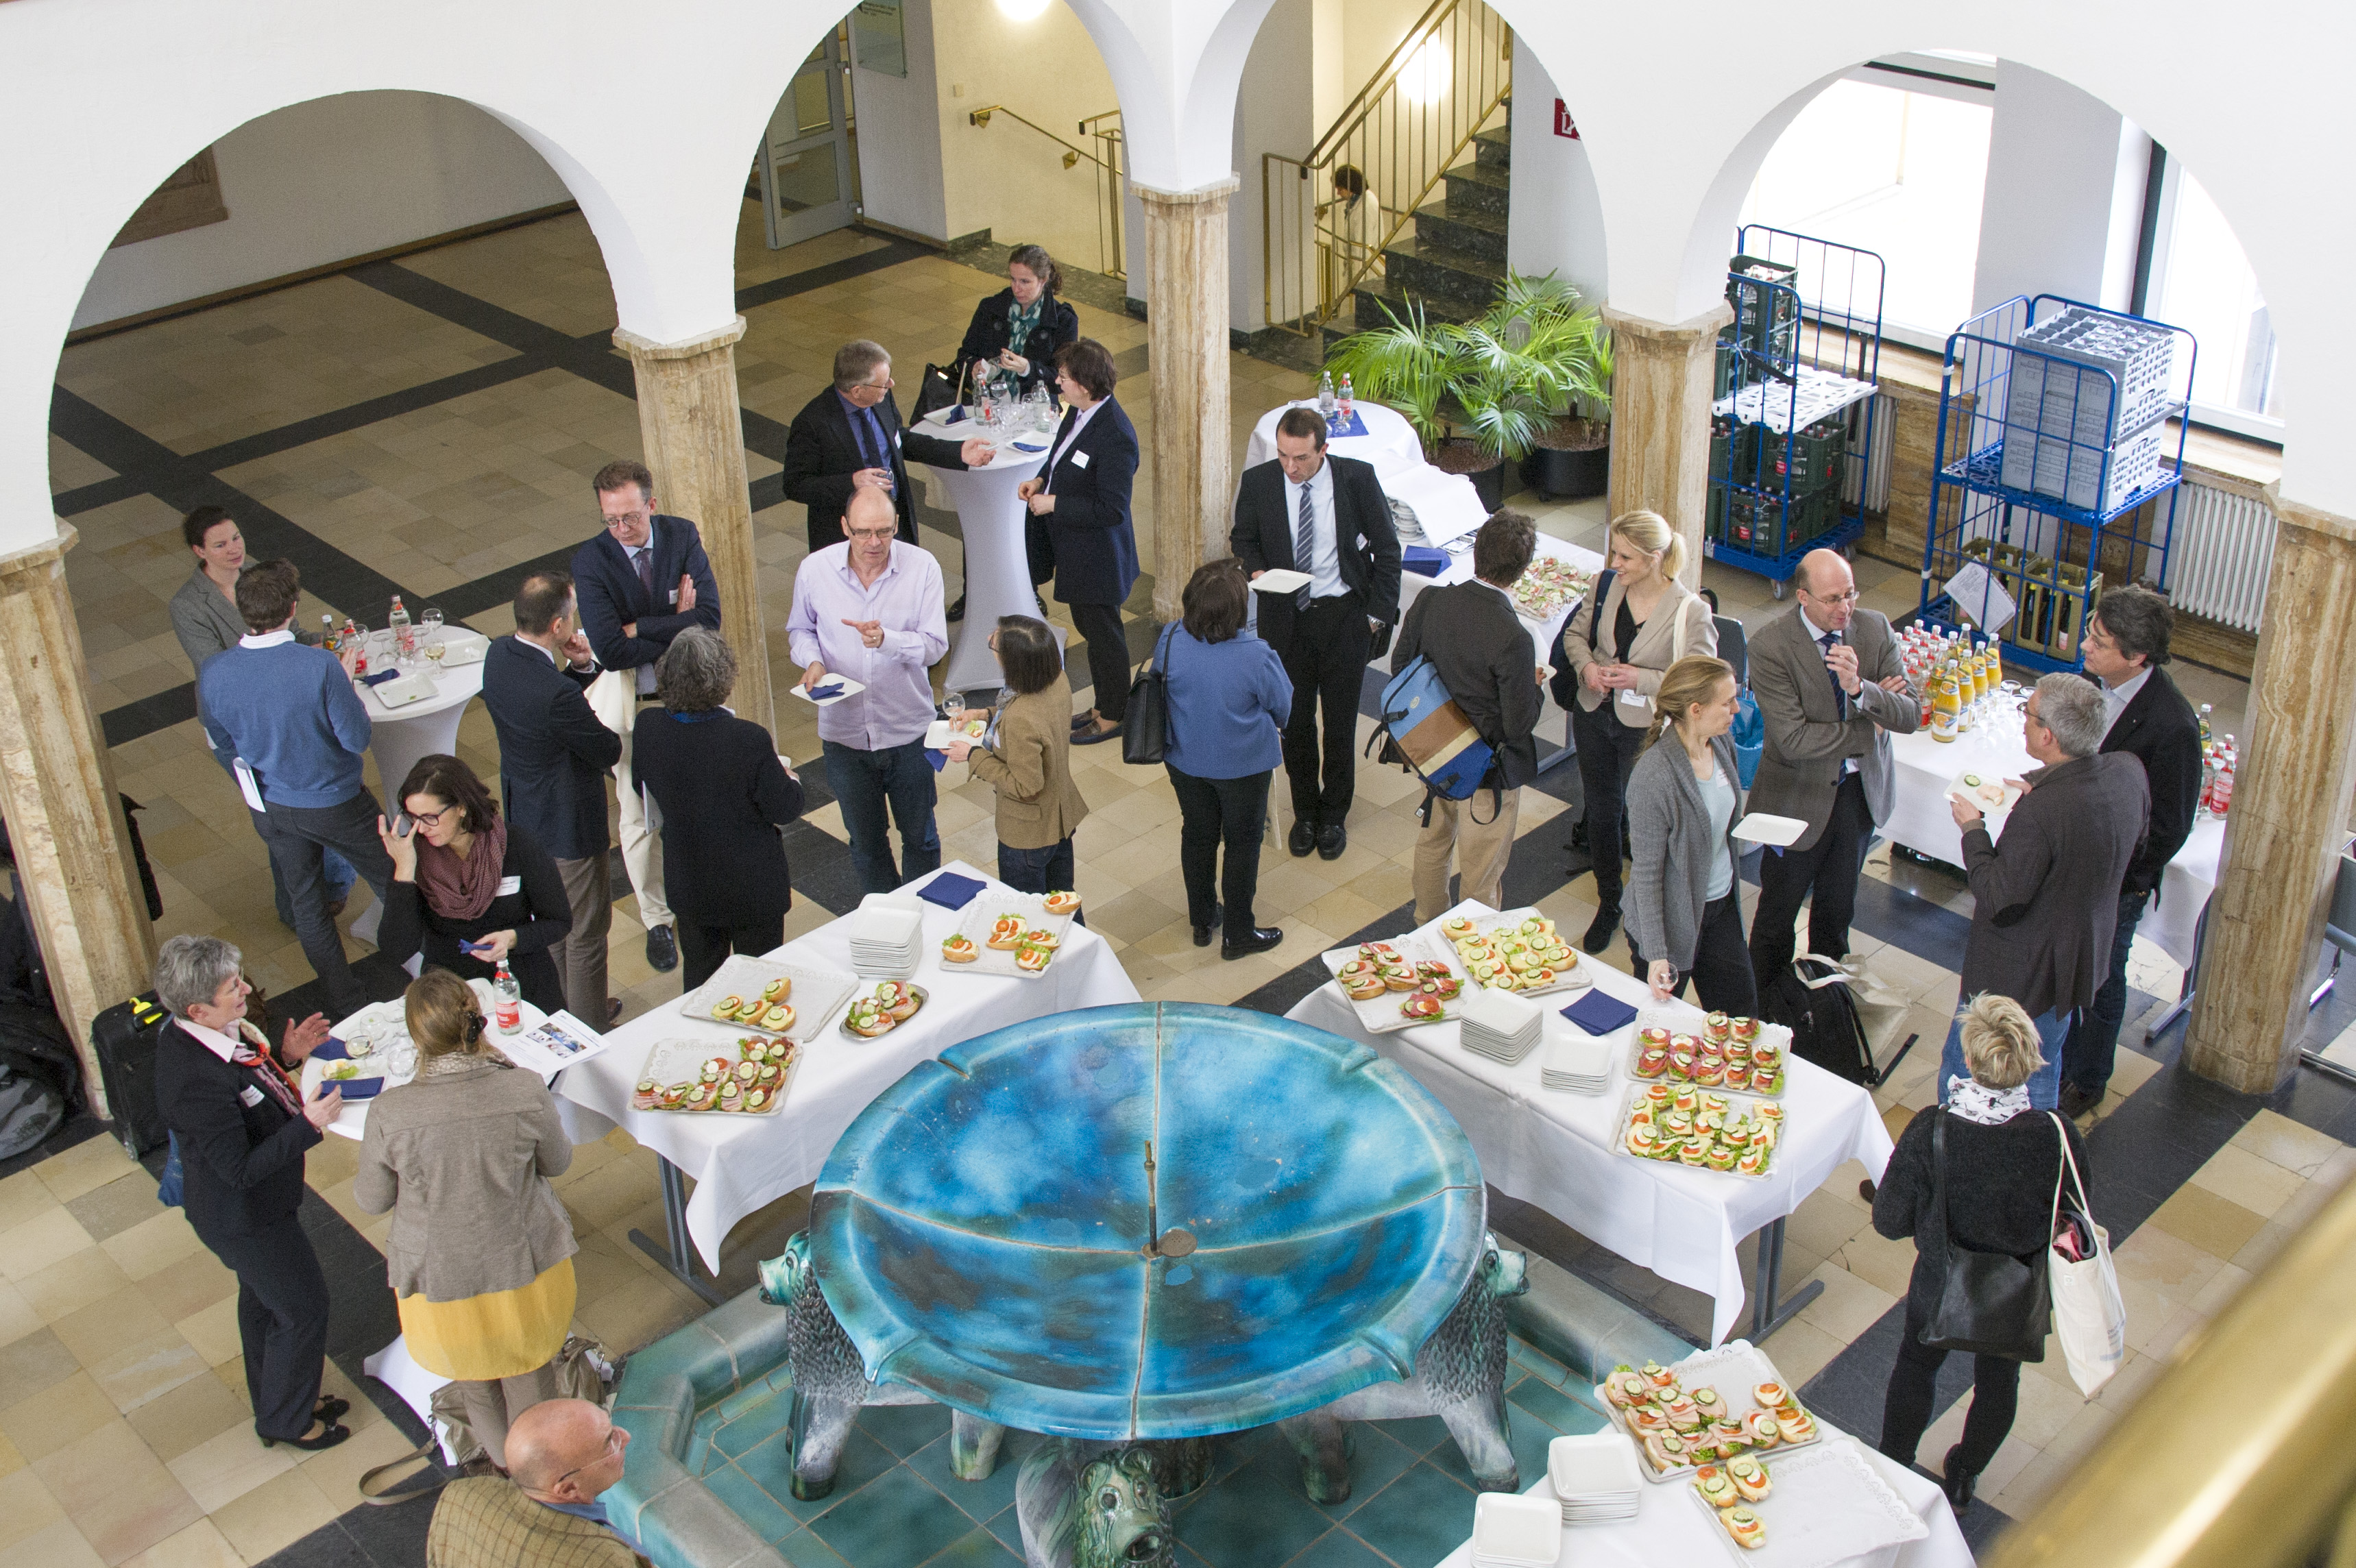 During the symposium there were numerous opportunities for networking.